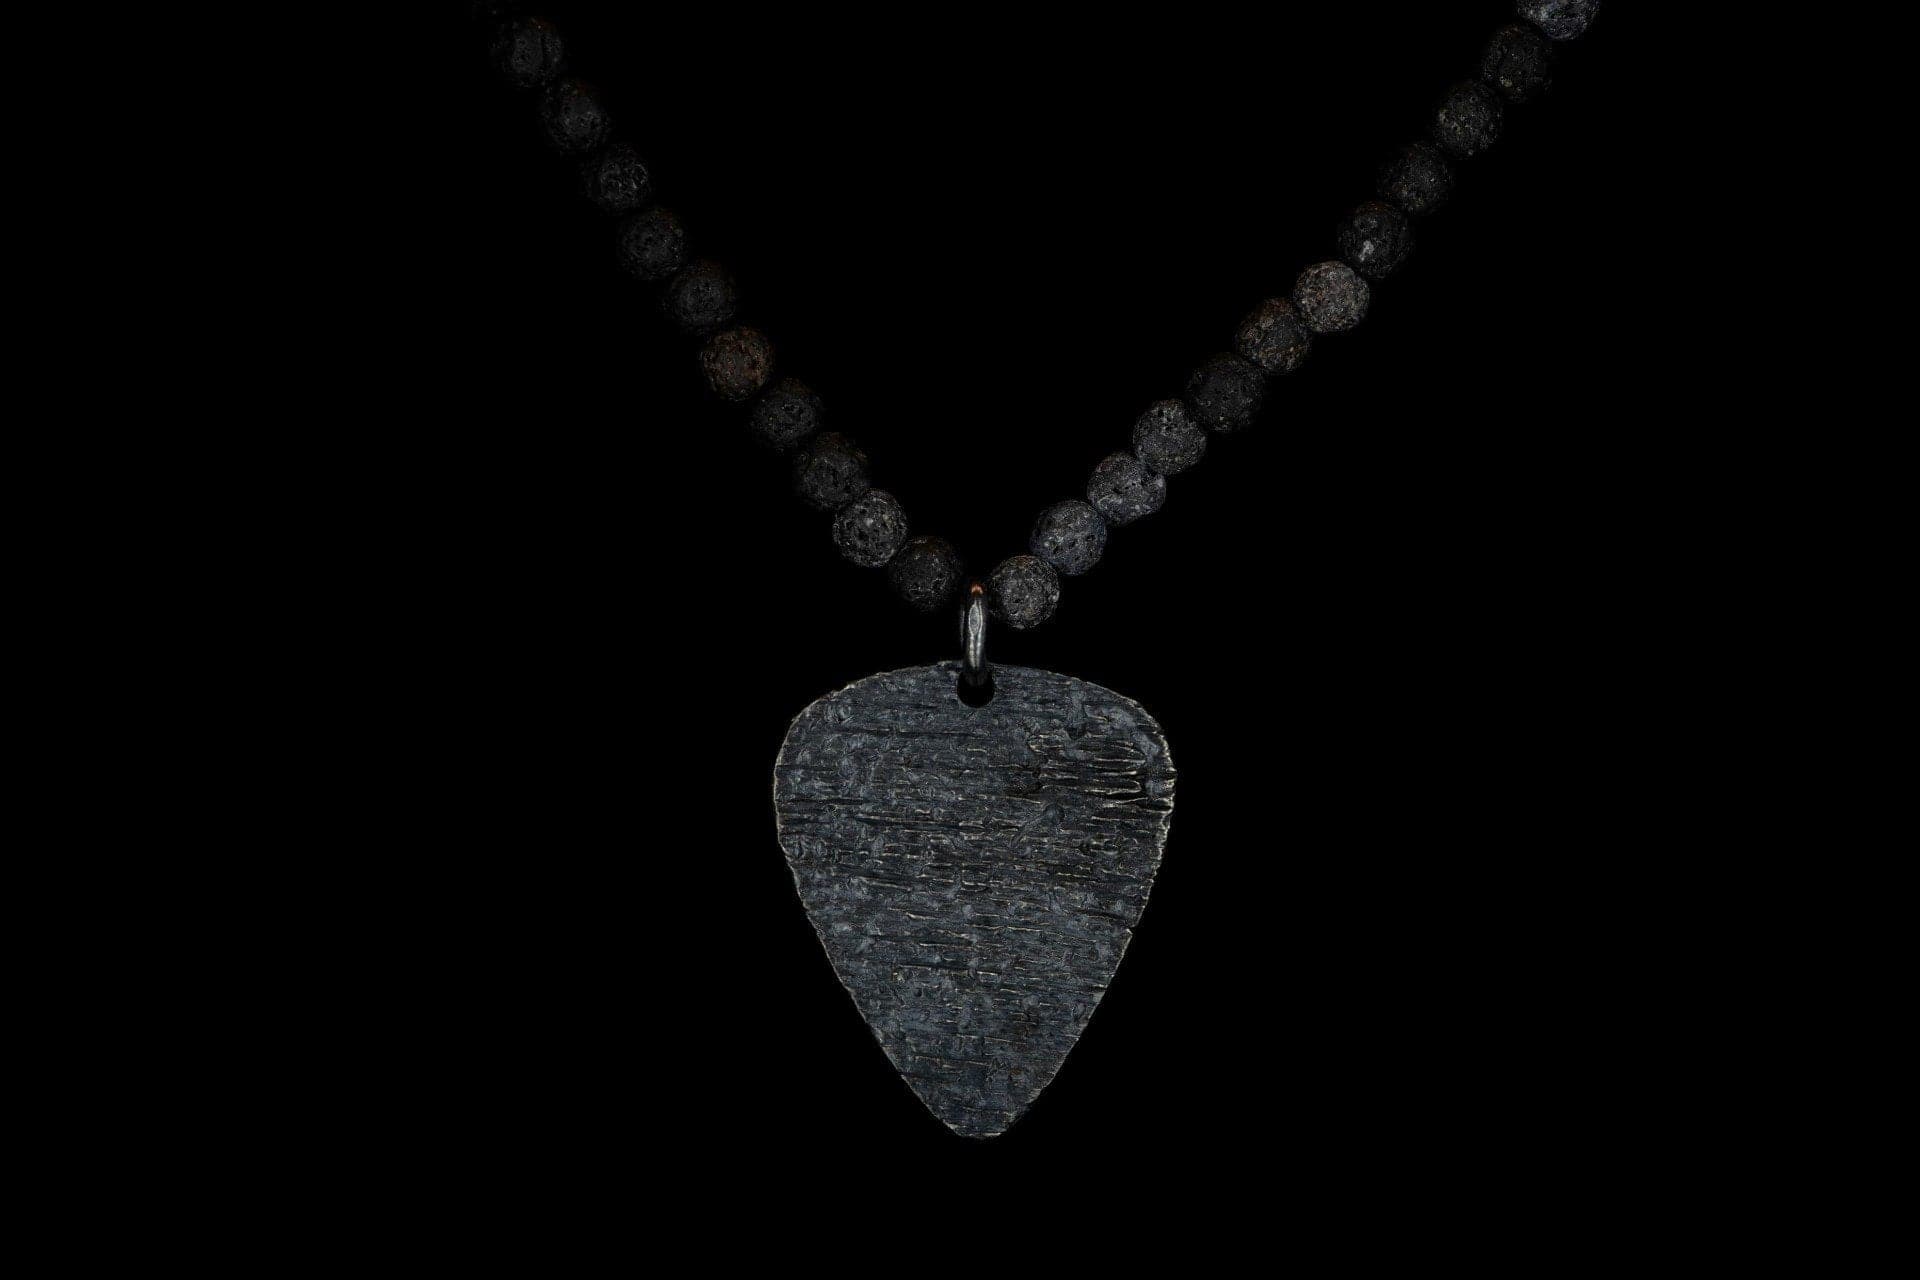 SMALL VOLCANIC BLACK TEXTURED GUITAR PICK NECKLACE